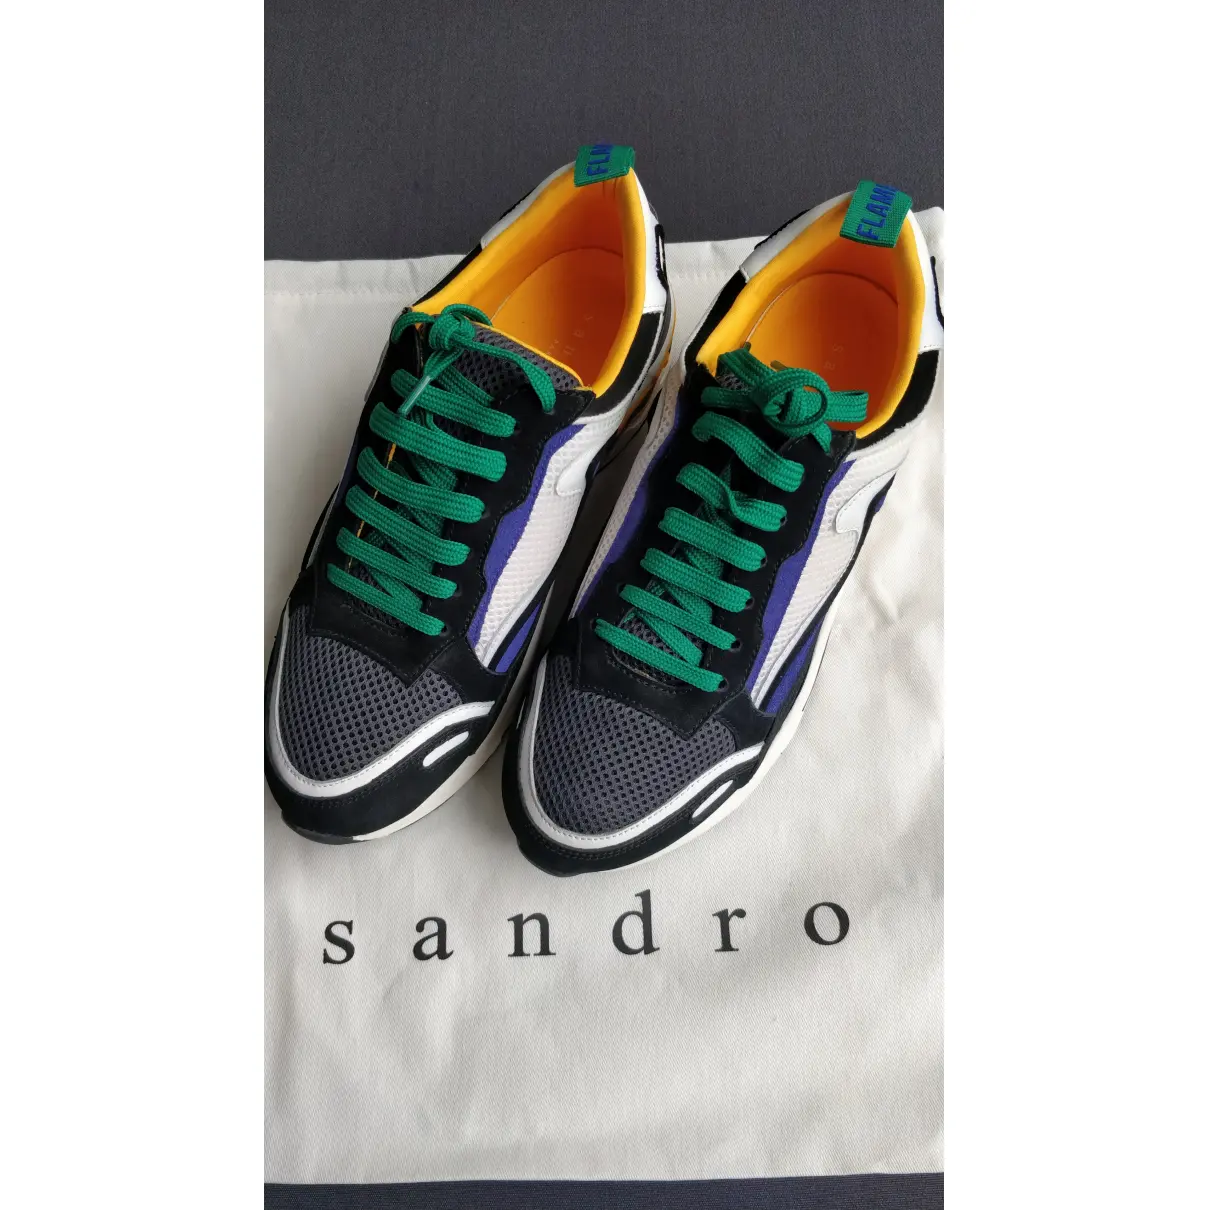 Buy Sandro Flame leather trainers online